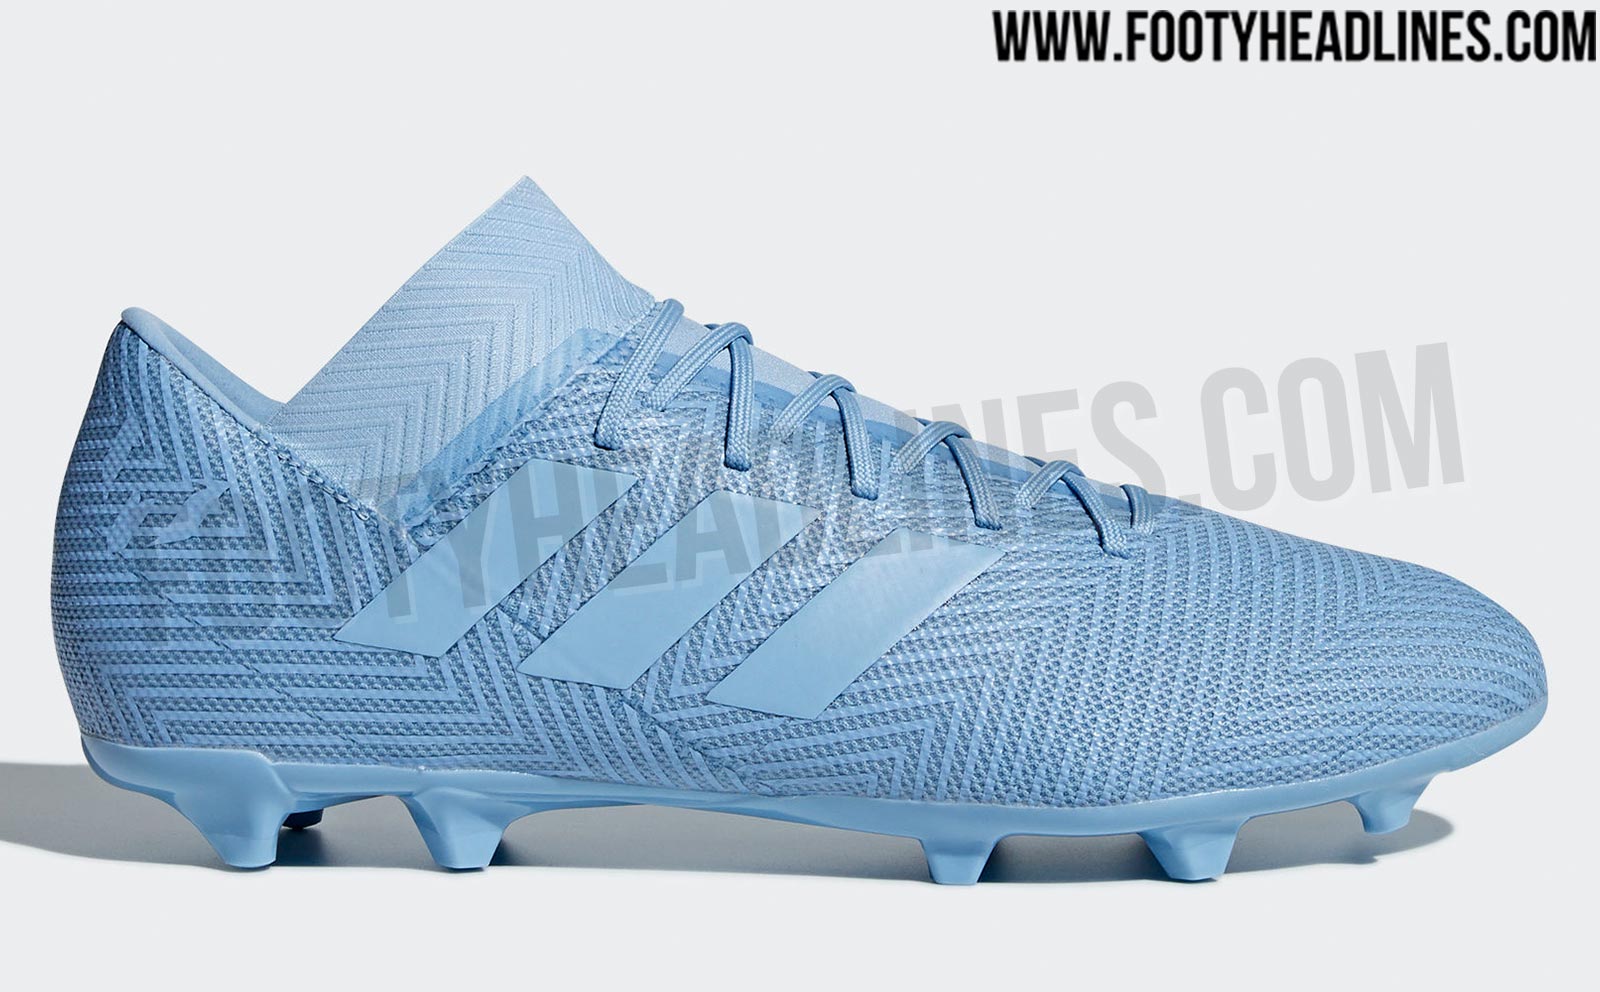 messi cleats 2019